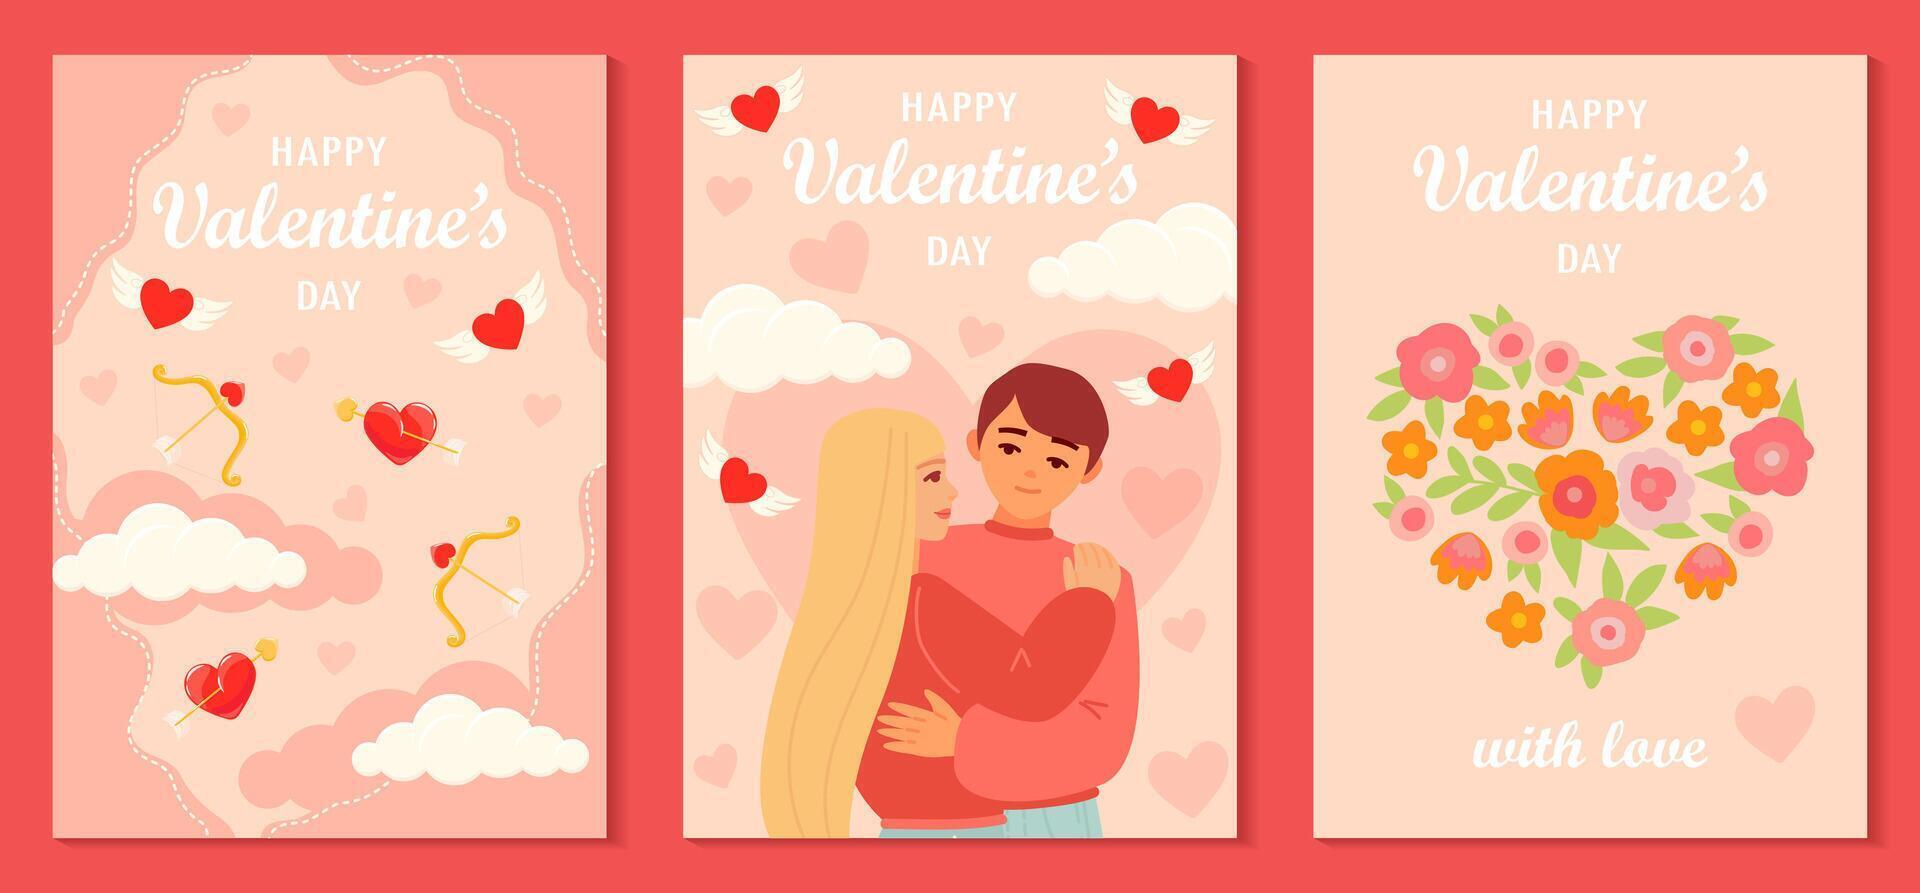 Set of Valentine's day greeting cards with beautiful couple of woman and man embracing, flowers heart and Cupid's arrow. Cartoon illustration of people dating and in love vector